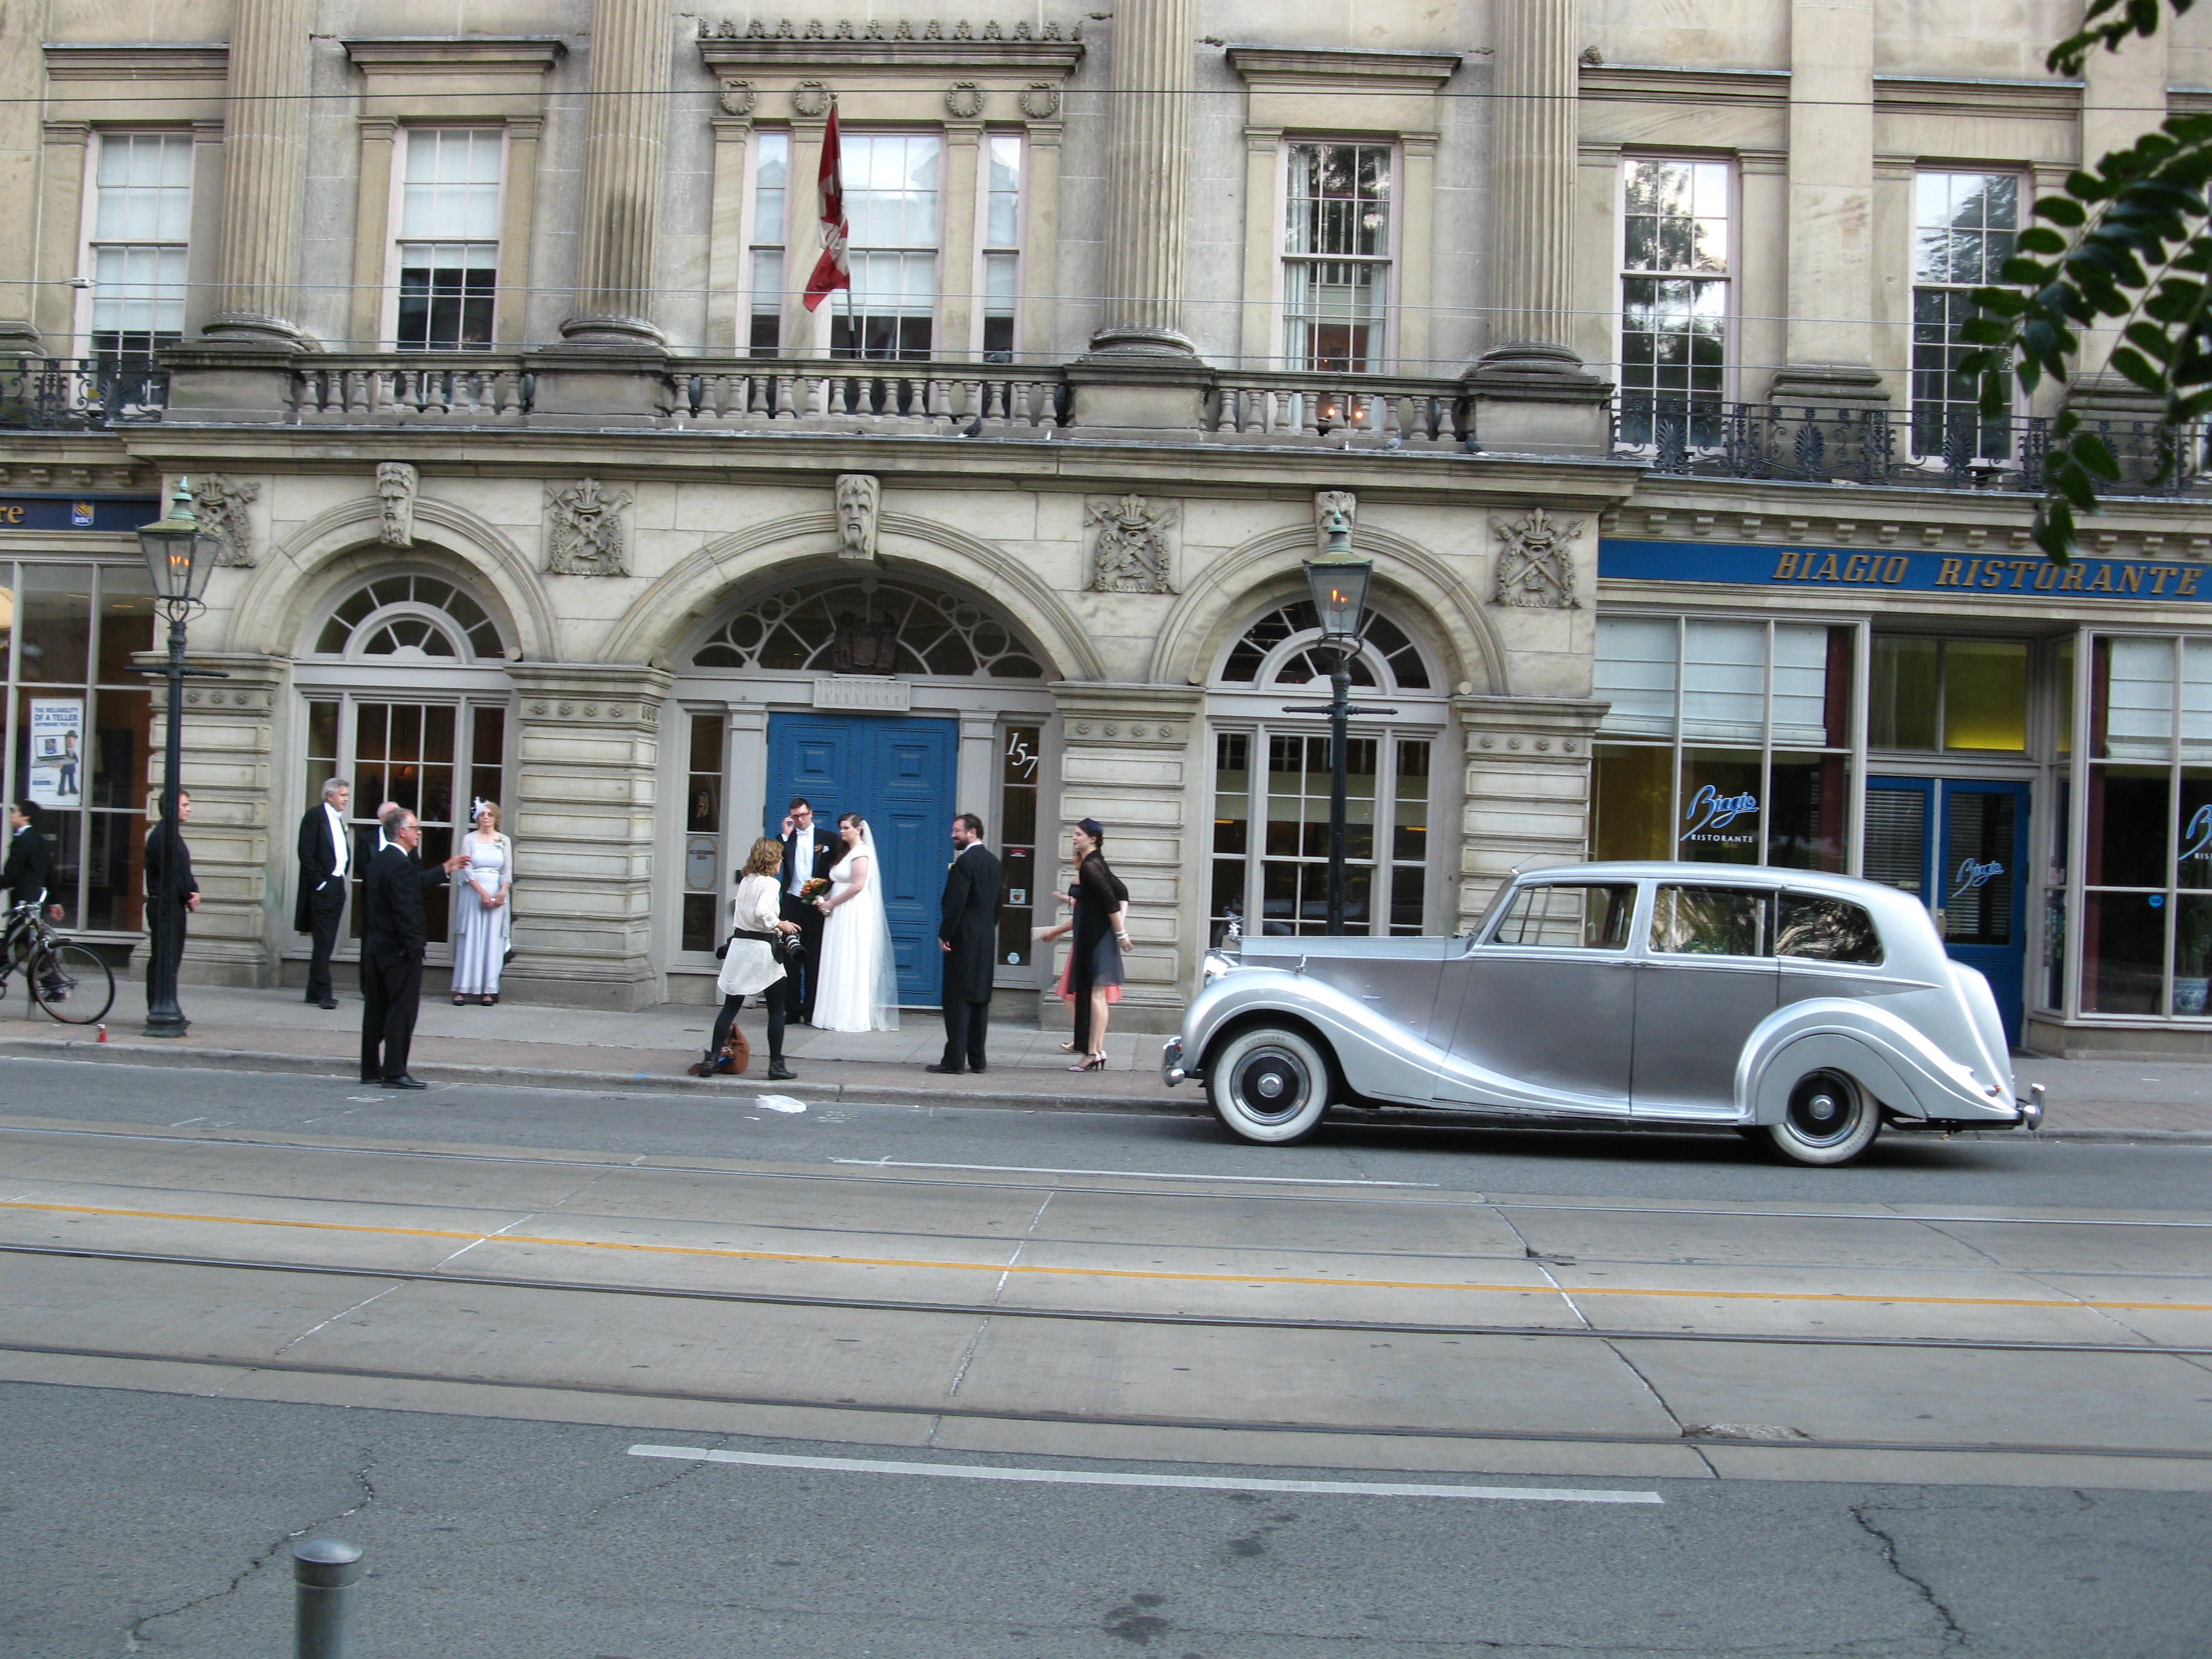 Wedding party in front of the st lawrence town halll.jpg photo